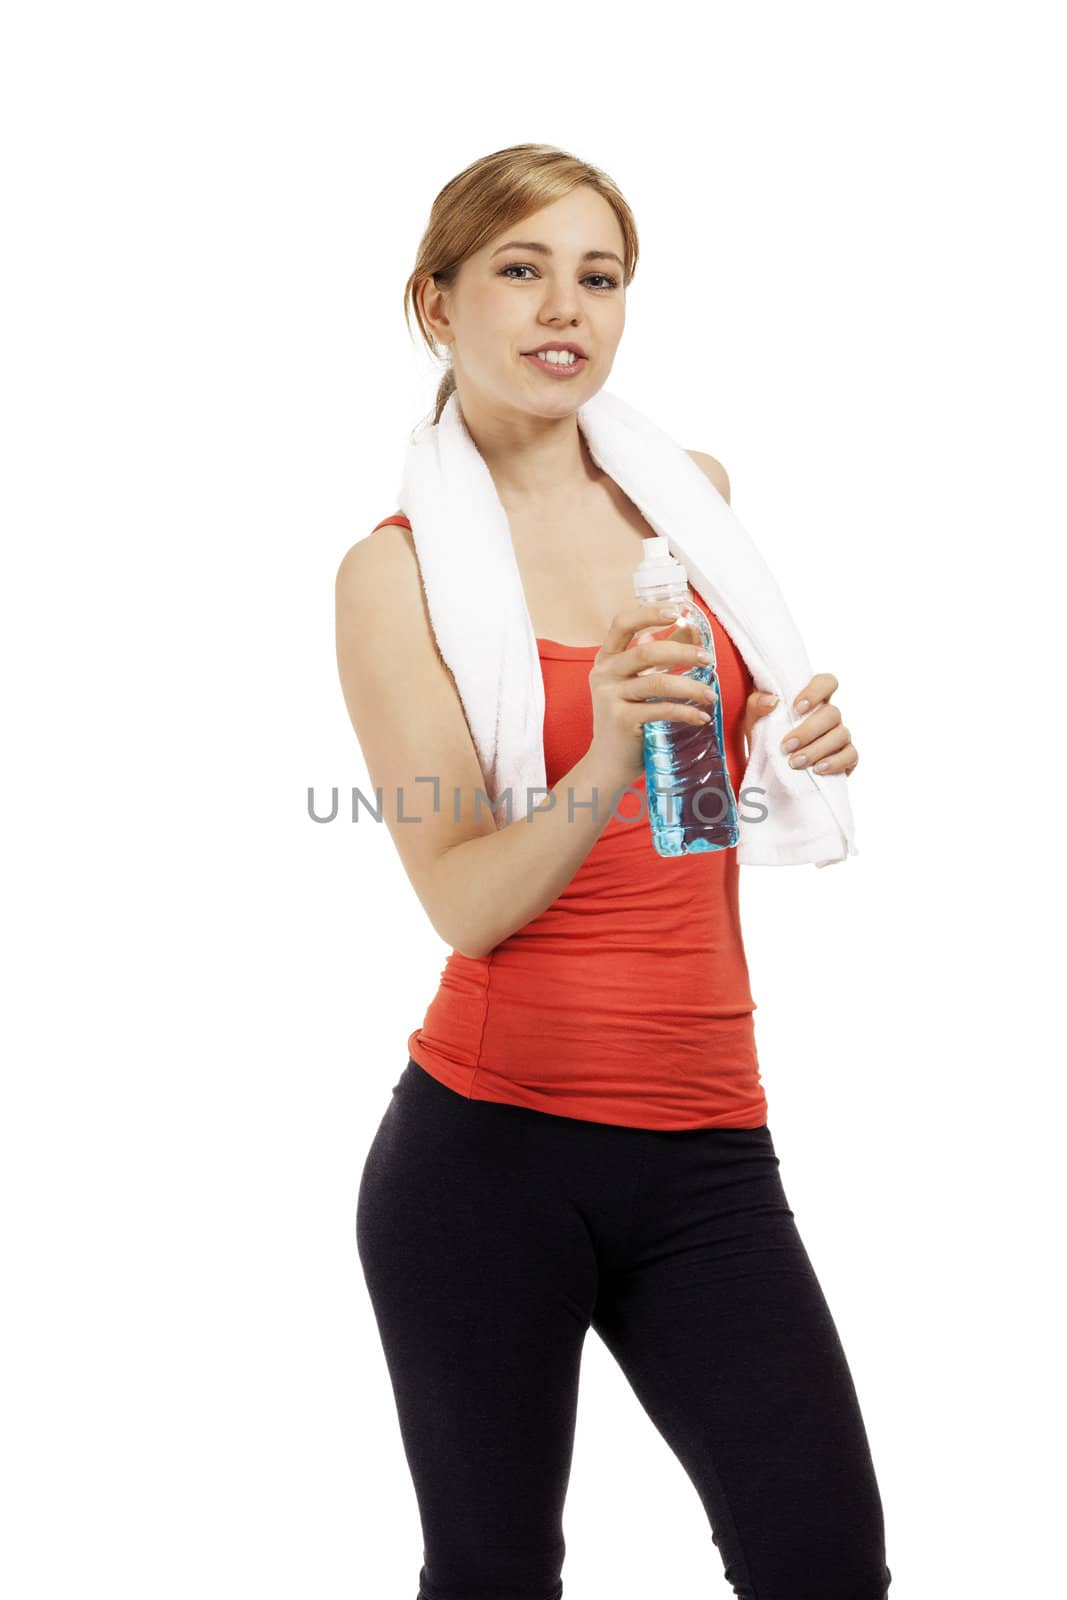 young fitness woman with a bottle of water by RobStark